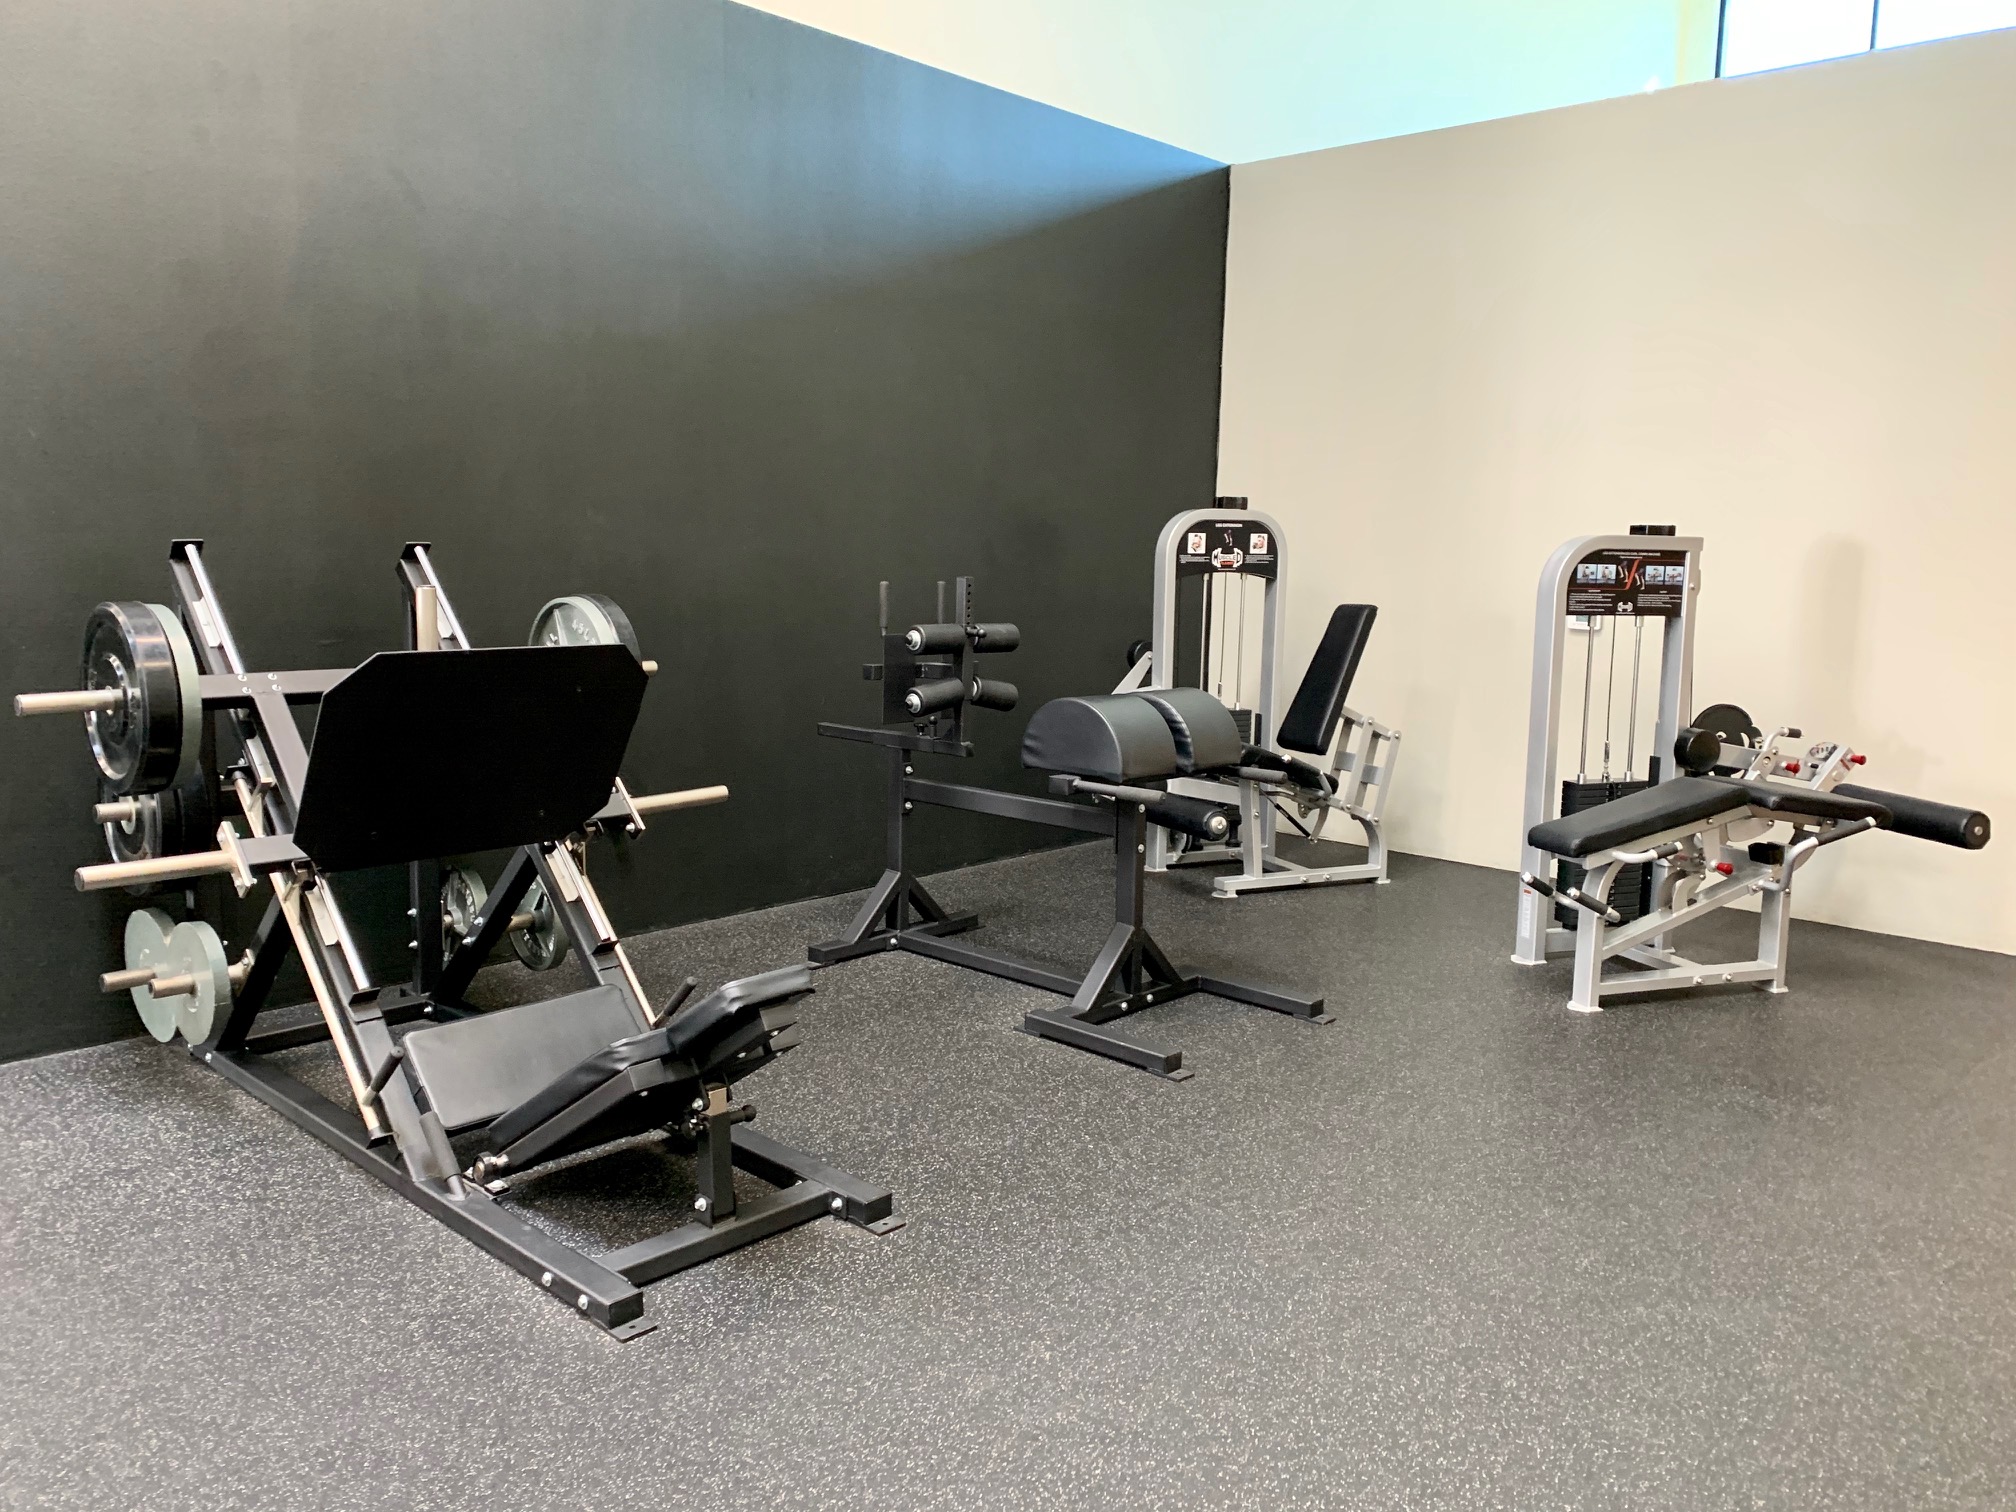 GYM RATS FIT - 23 Photos & 21 Reviews - 9950 Indiana Ave, Riverside,  California - Gyms - Phone Number - Yelp